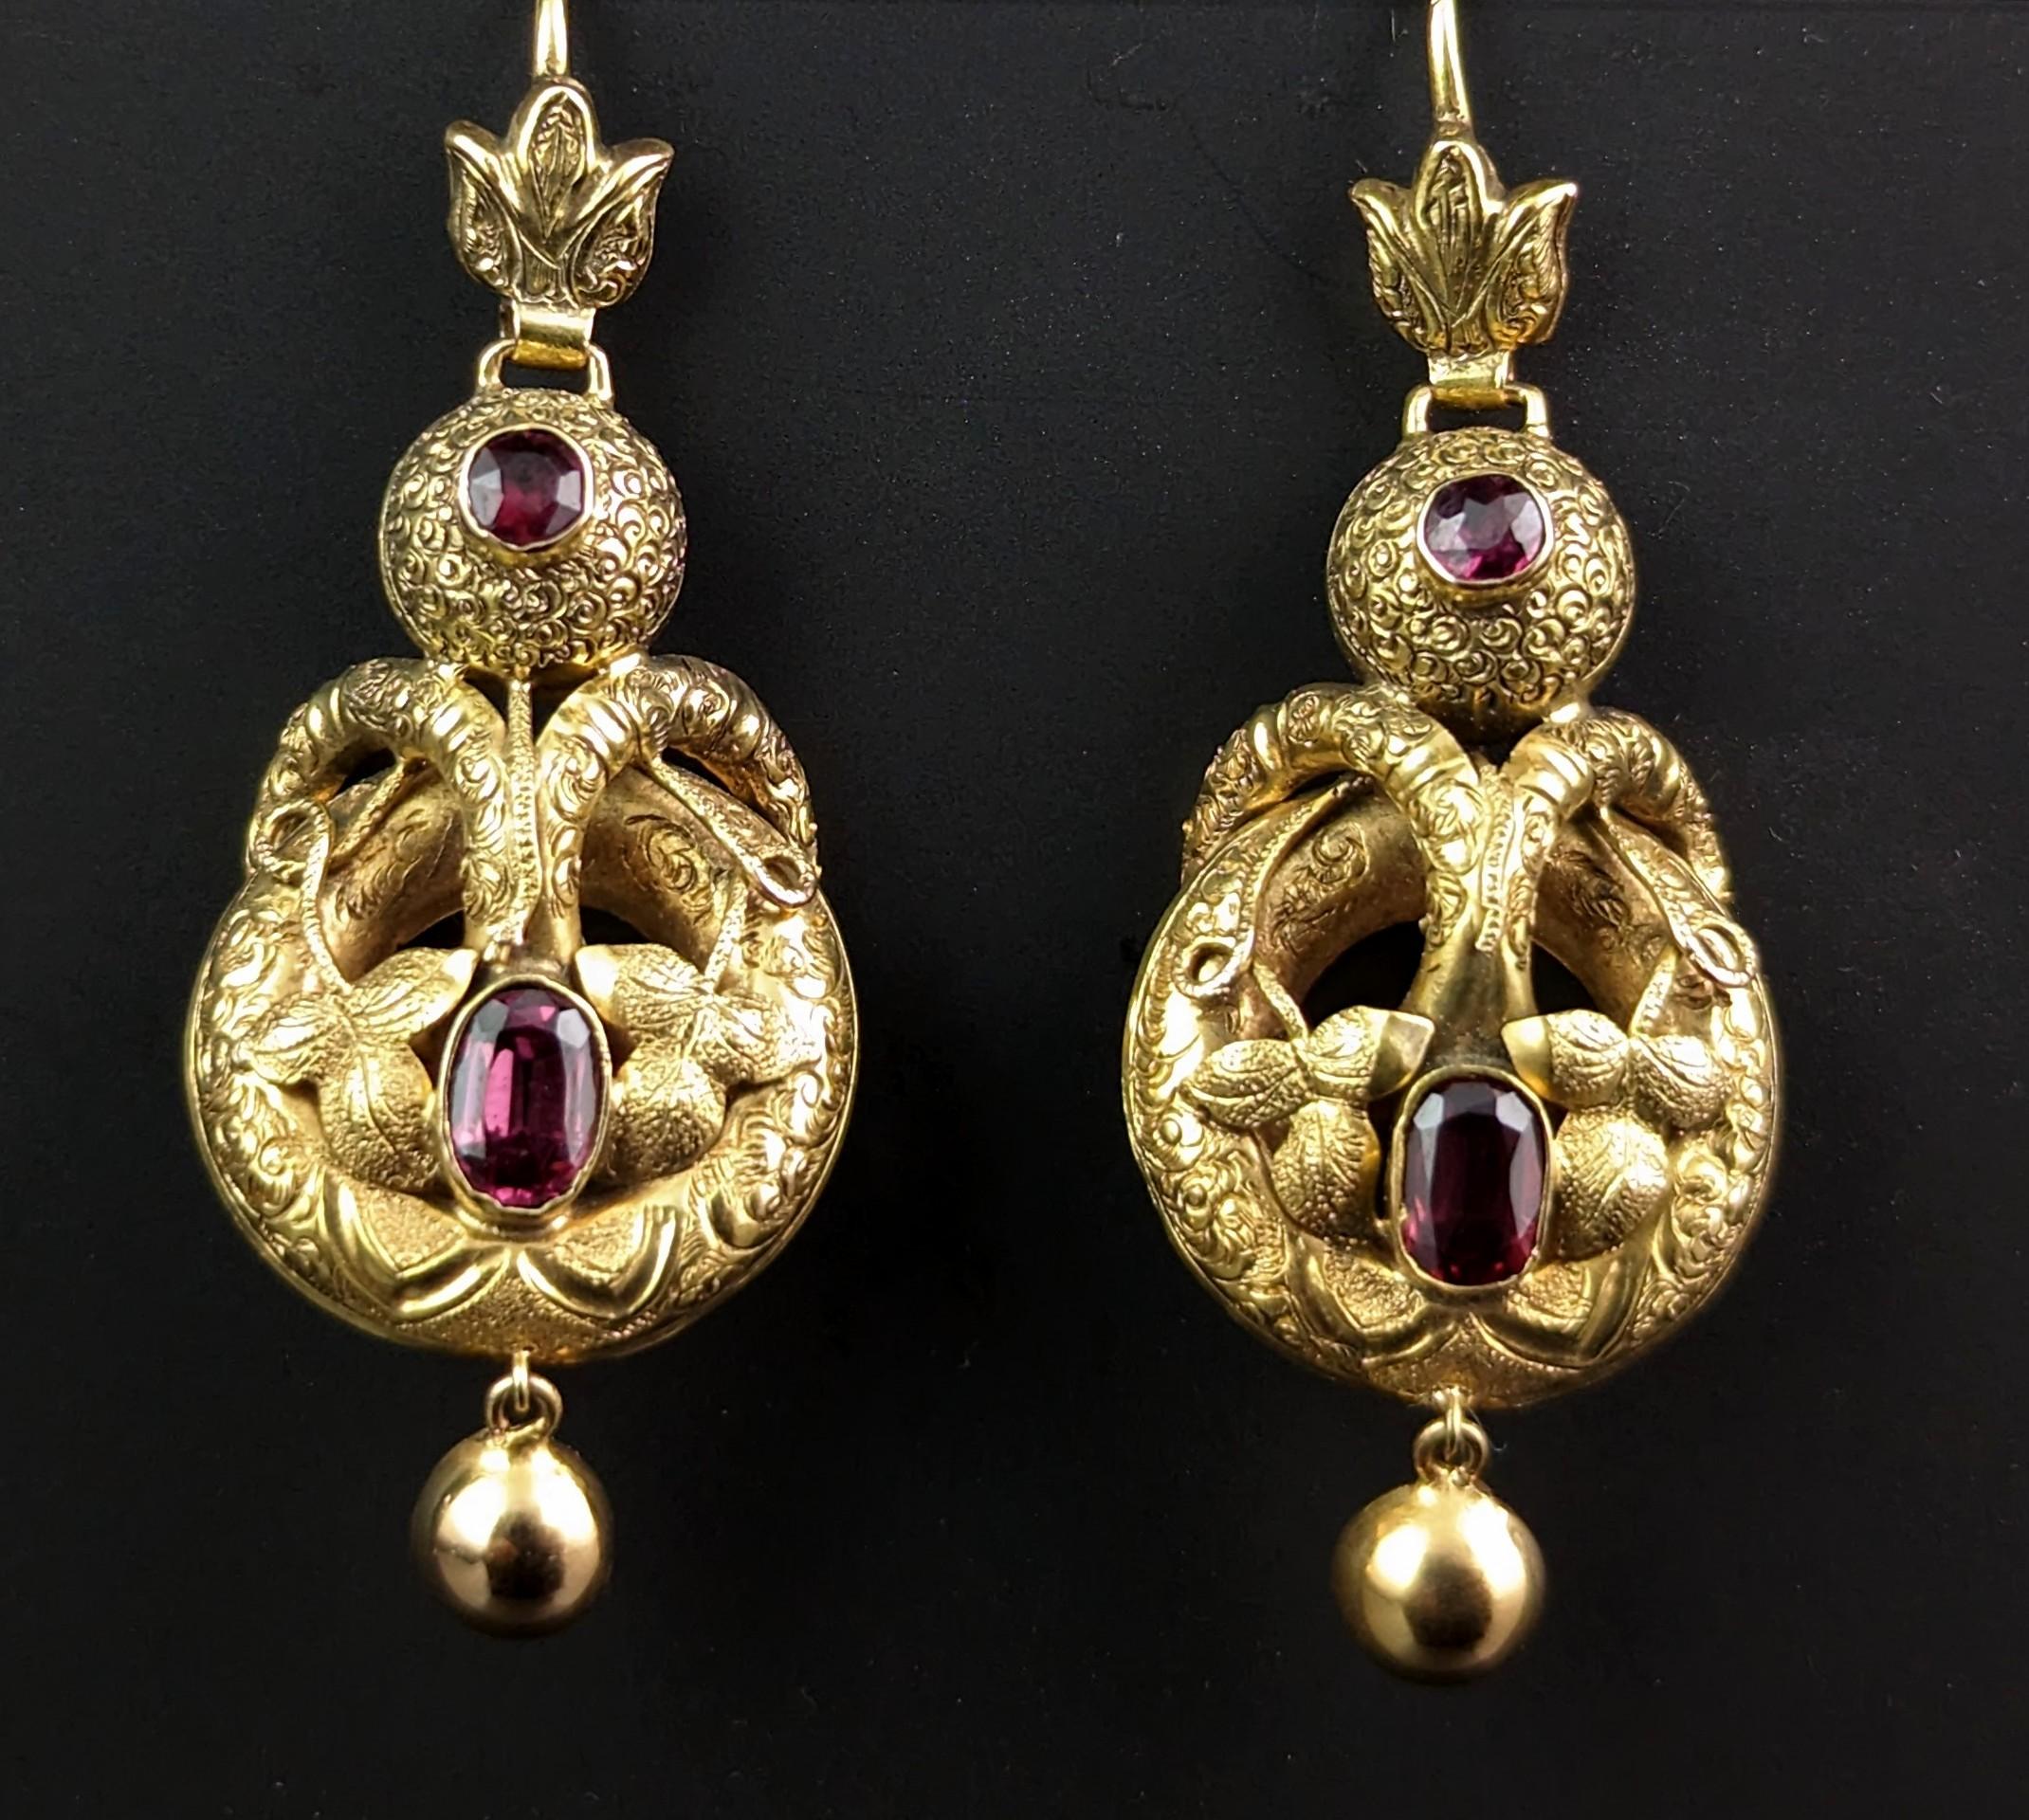 Antique Victorian Garnet Drop Earrings, 18 Carat Gold, Leaves and Vine For Sale 7